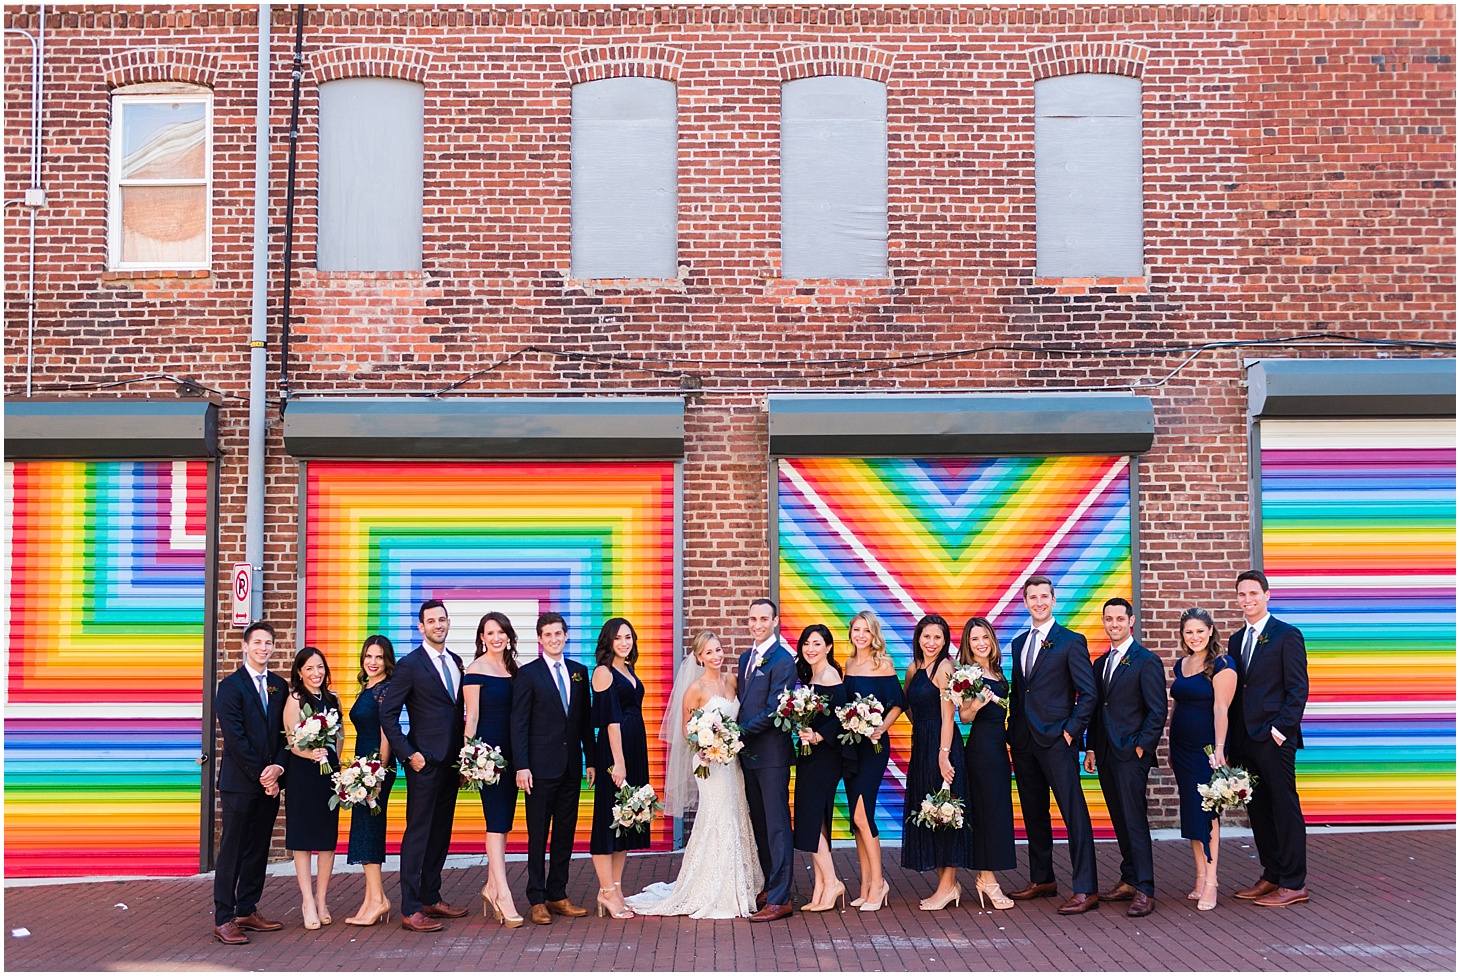 Wedding Party Portraits at Long View Gallery, Industrial-Chic Wedding in DC, Sarah Bradshaw Photography, DC Wedding Photographer